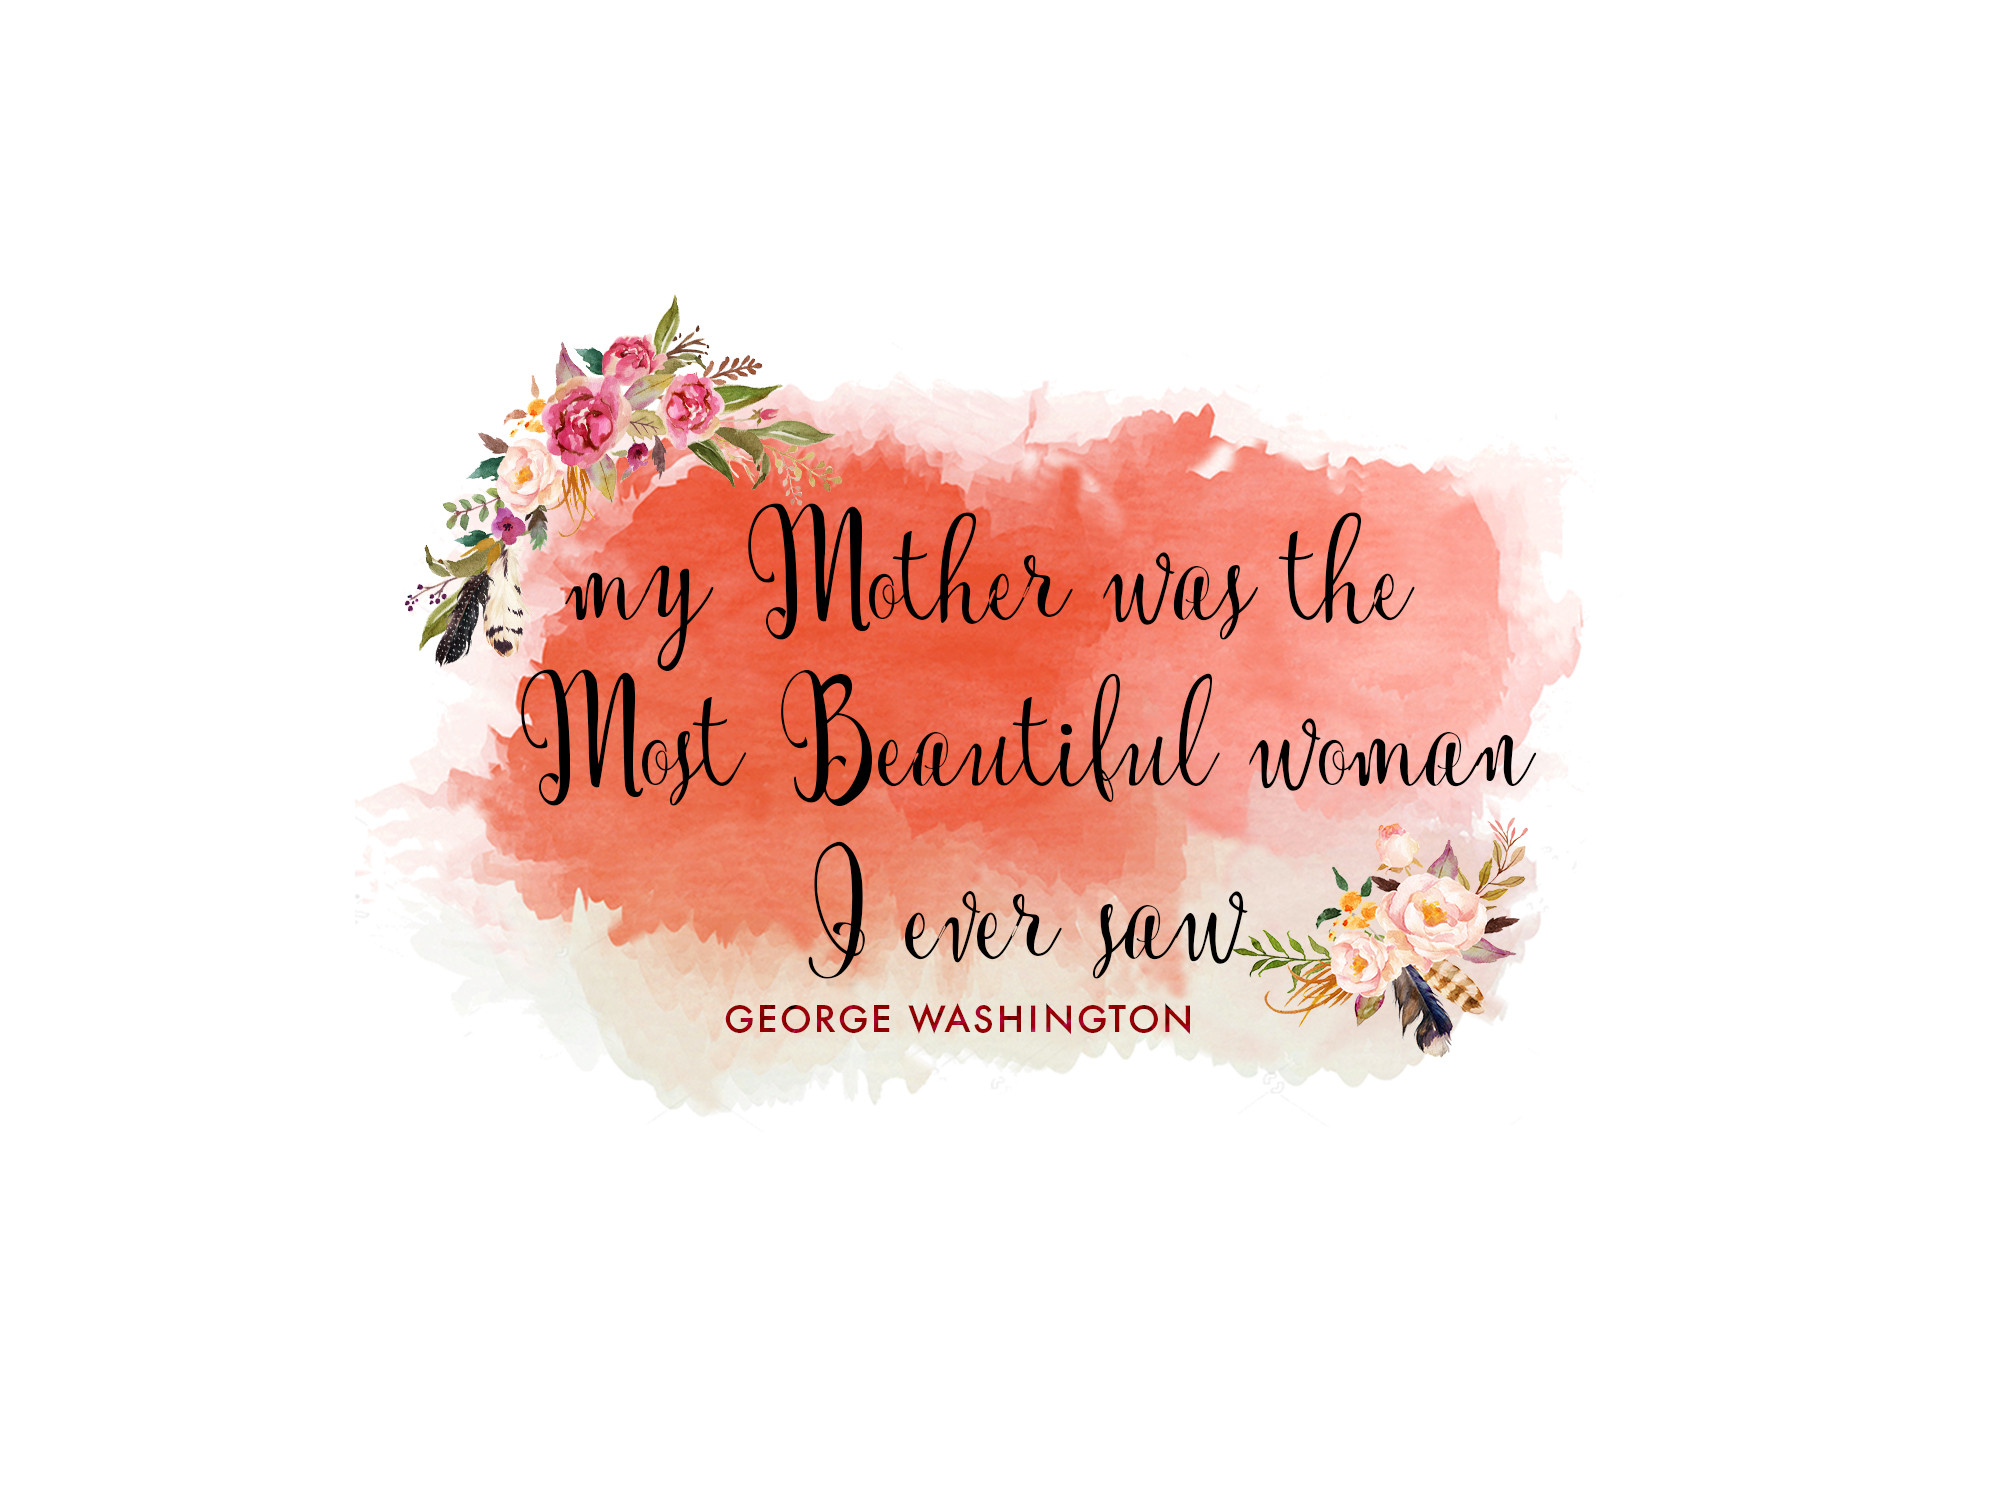 Mothers Day Wife Quotes
 Mother s Day Quotes Slogans Quotations & Sayings 2019